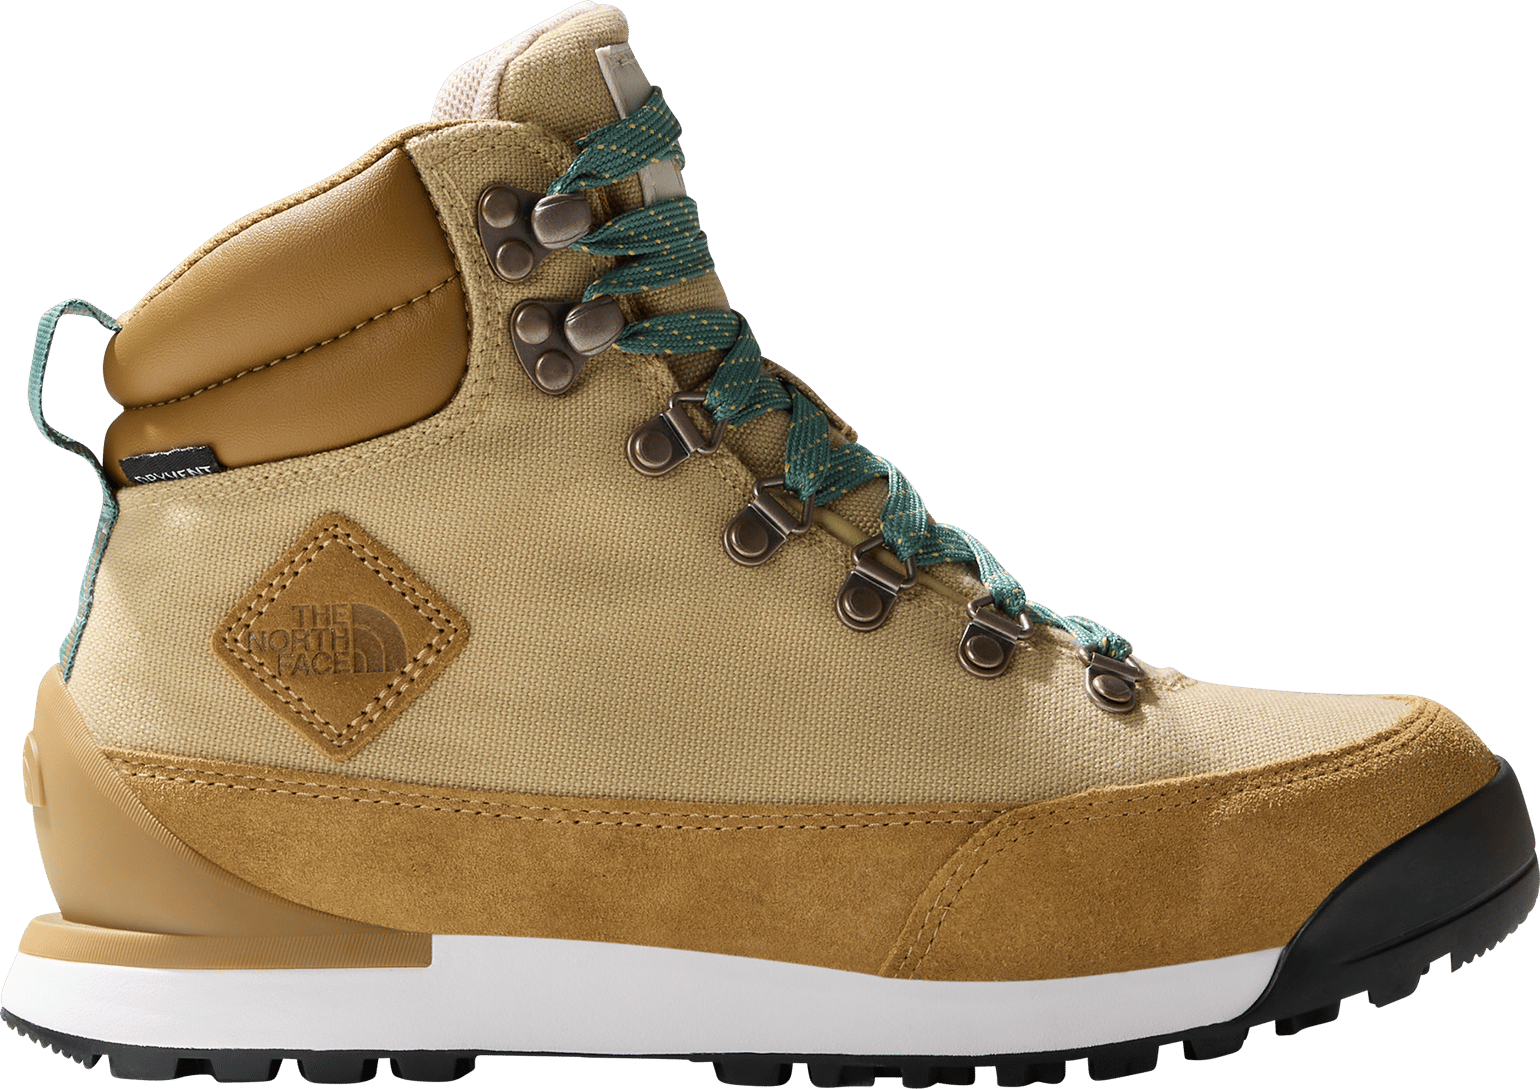 The North Face Women's Back-to-Berkeley IV Textile Lifestyle Boots KHAKI STONE/UTILITY BROWN